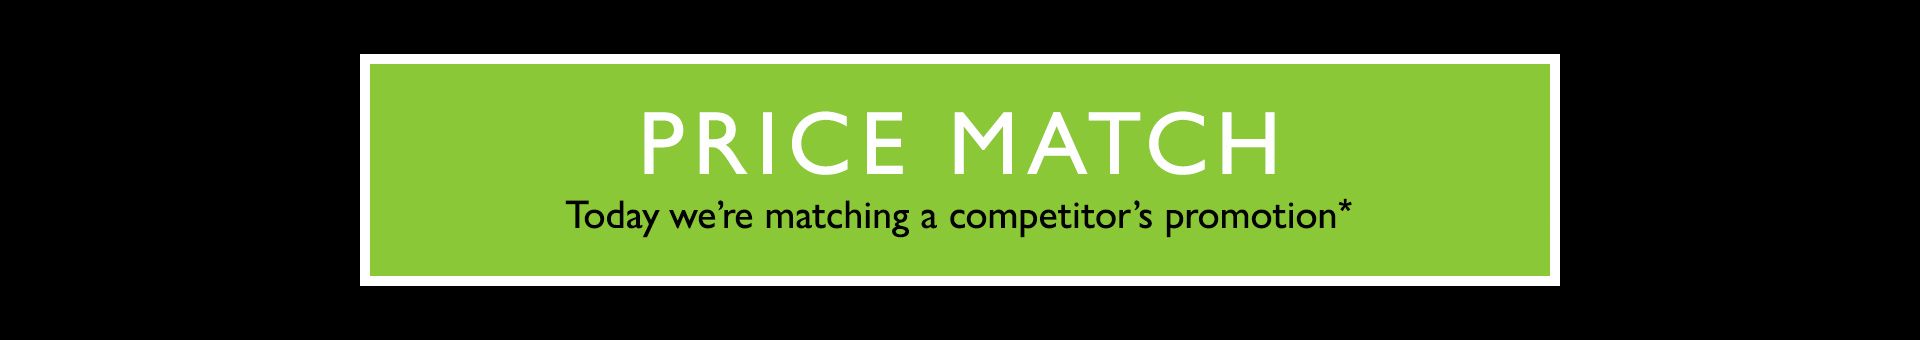  Price Match - Today we're matching a competitor's promotion